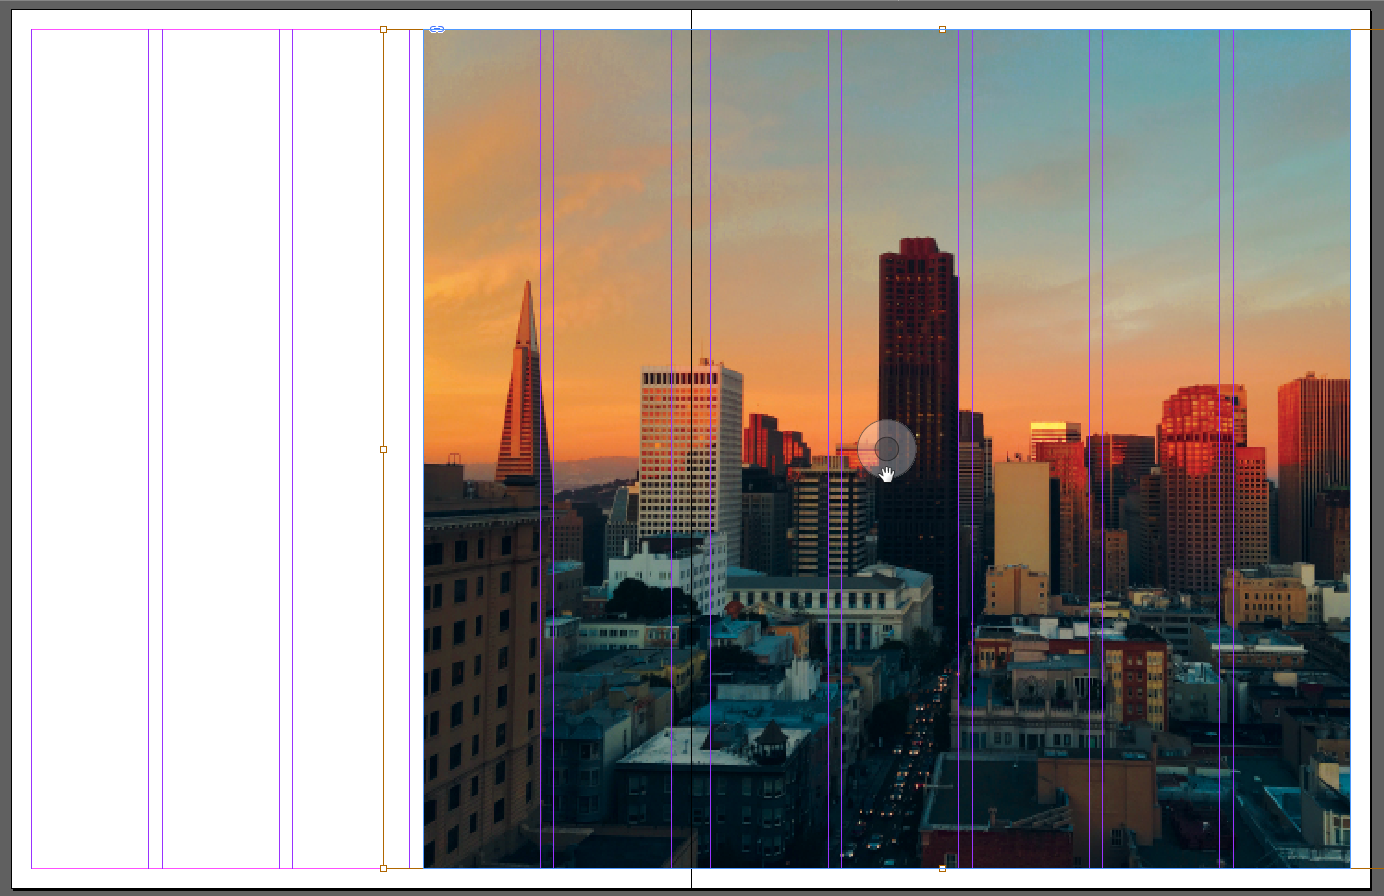 Screen capture showing photo after scaling and position adjustment within its image frame. The image fills the frame and the tallest building in the photo is positioned at about the center of the image frame.